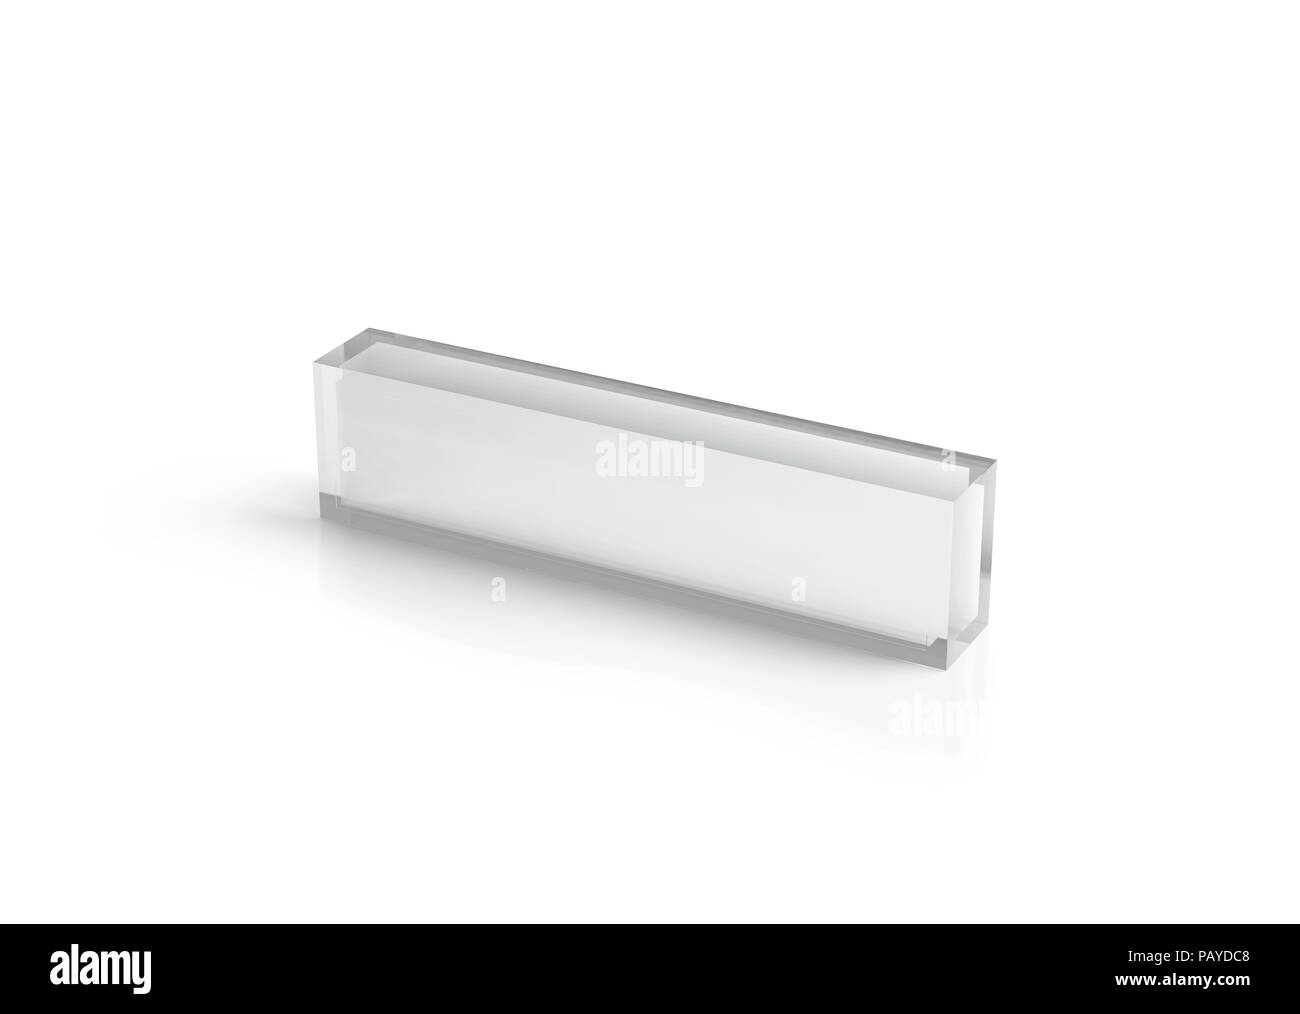 Download Blank Transparent Glass Desk Block Mockup 3d Rendering Clear Plexiglas Name Plate Design Mock Up Empty Plastic Namplate Template Isolated On White Stock Photo Alamy